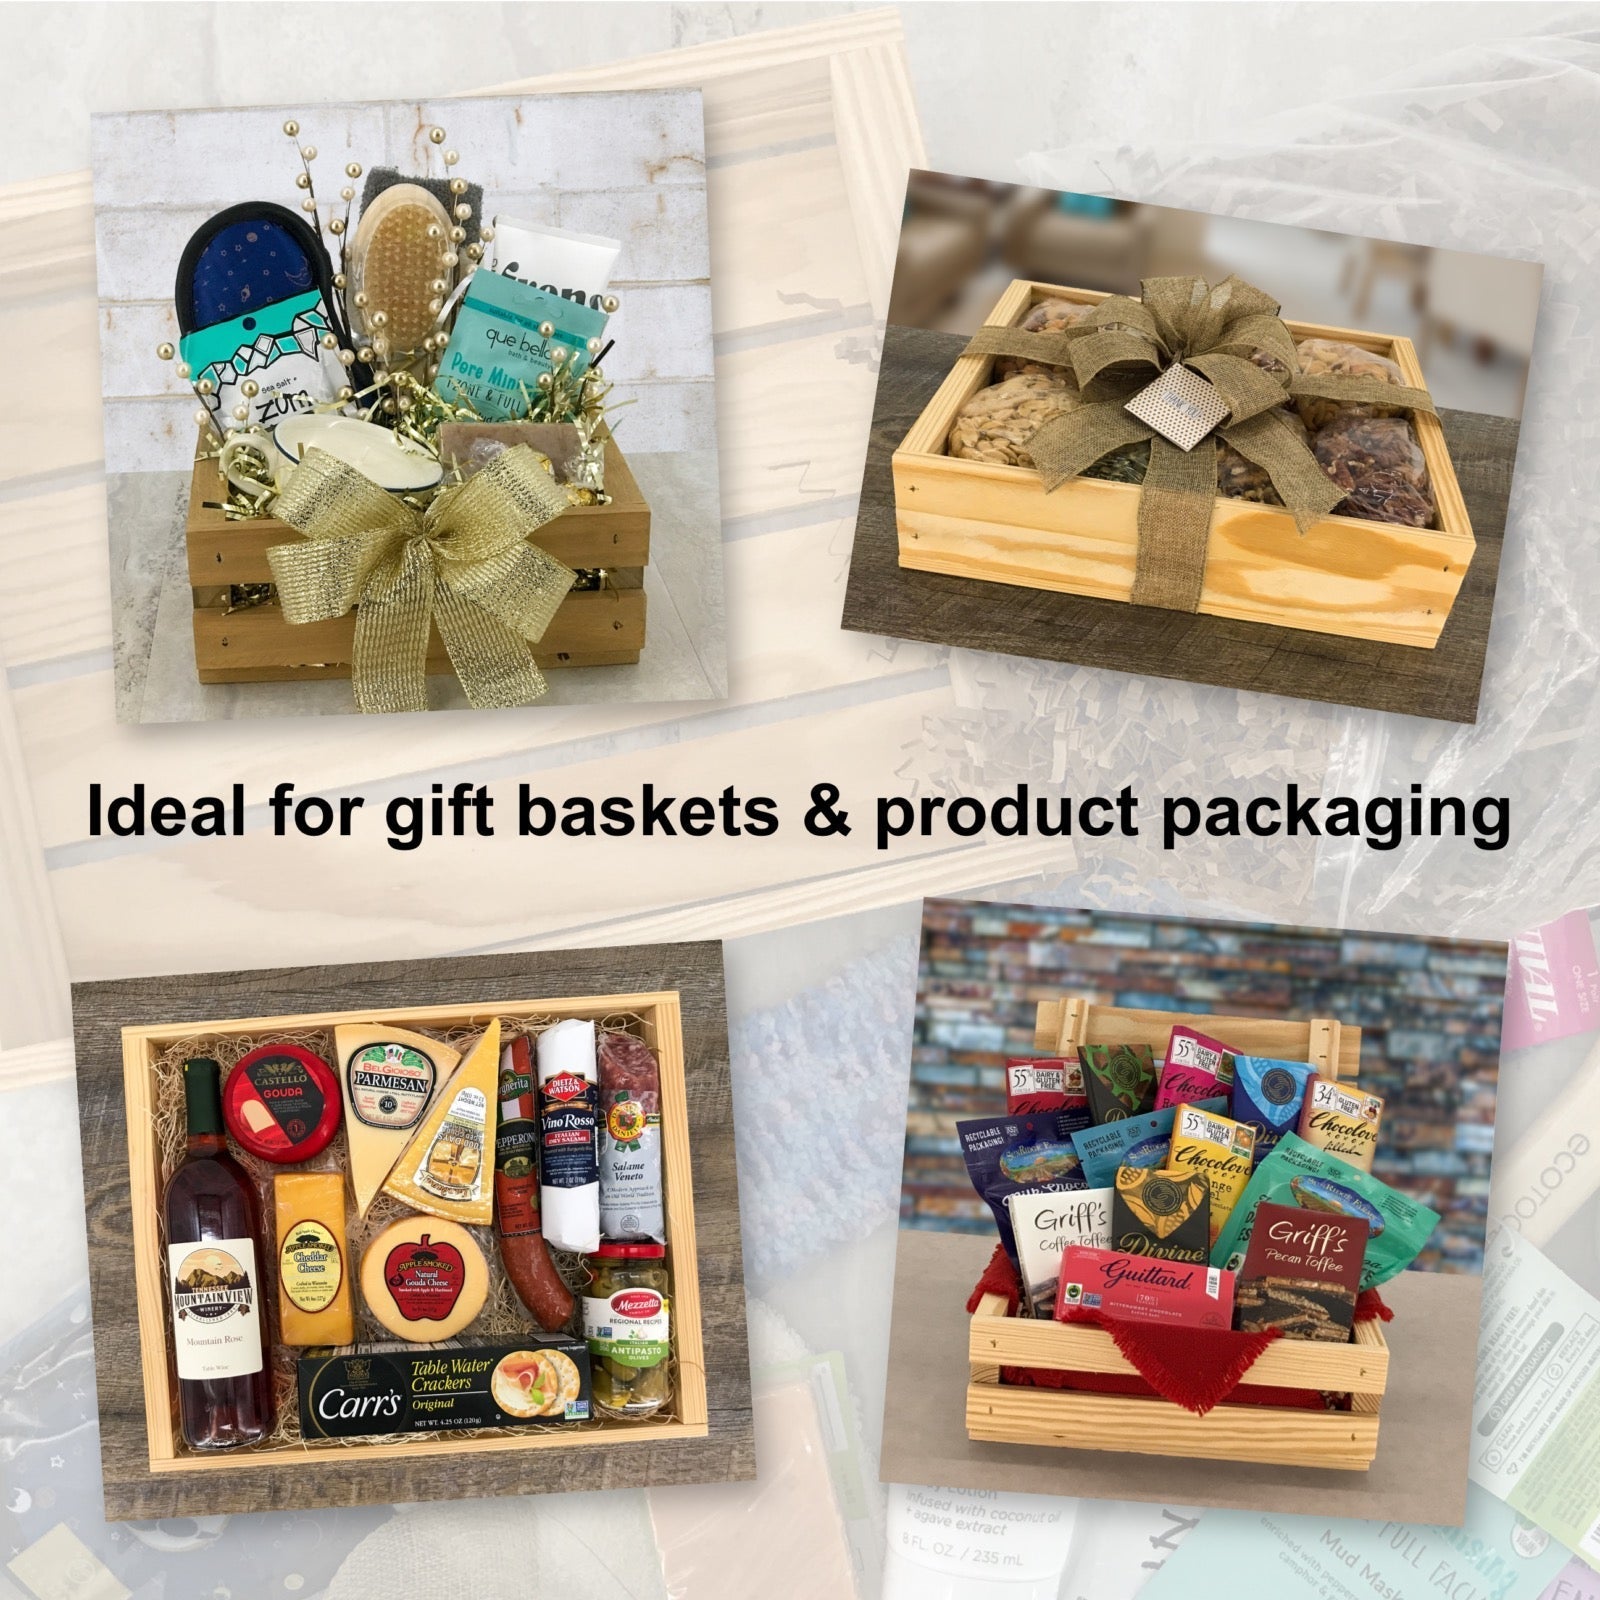 Ideal for gift baskets and product packaging, B2-7.0625-5-4.3125-ST-NW-NL, 6-B2-7.0625-5-4.3125-ST-NW-NL, 12-B2-7.0625-5-4.3125-ST-NW-NL, 24-B2-7.0625-5-4.3125-ST-NW-NL, 48-B2-7.0625-5-4.3125-ST-NW-NL, 96-B2-7.0625-5-4.3125-ST-NW-NL